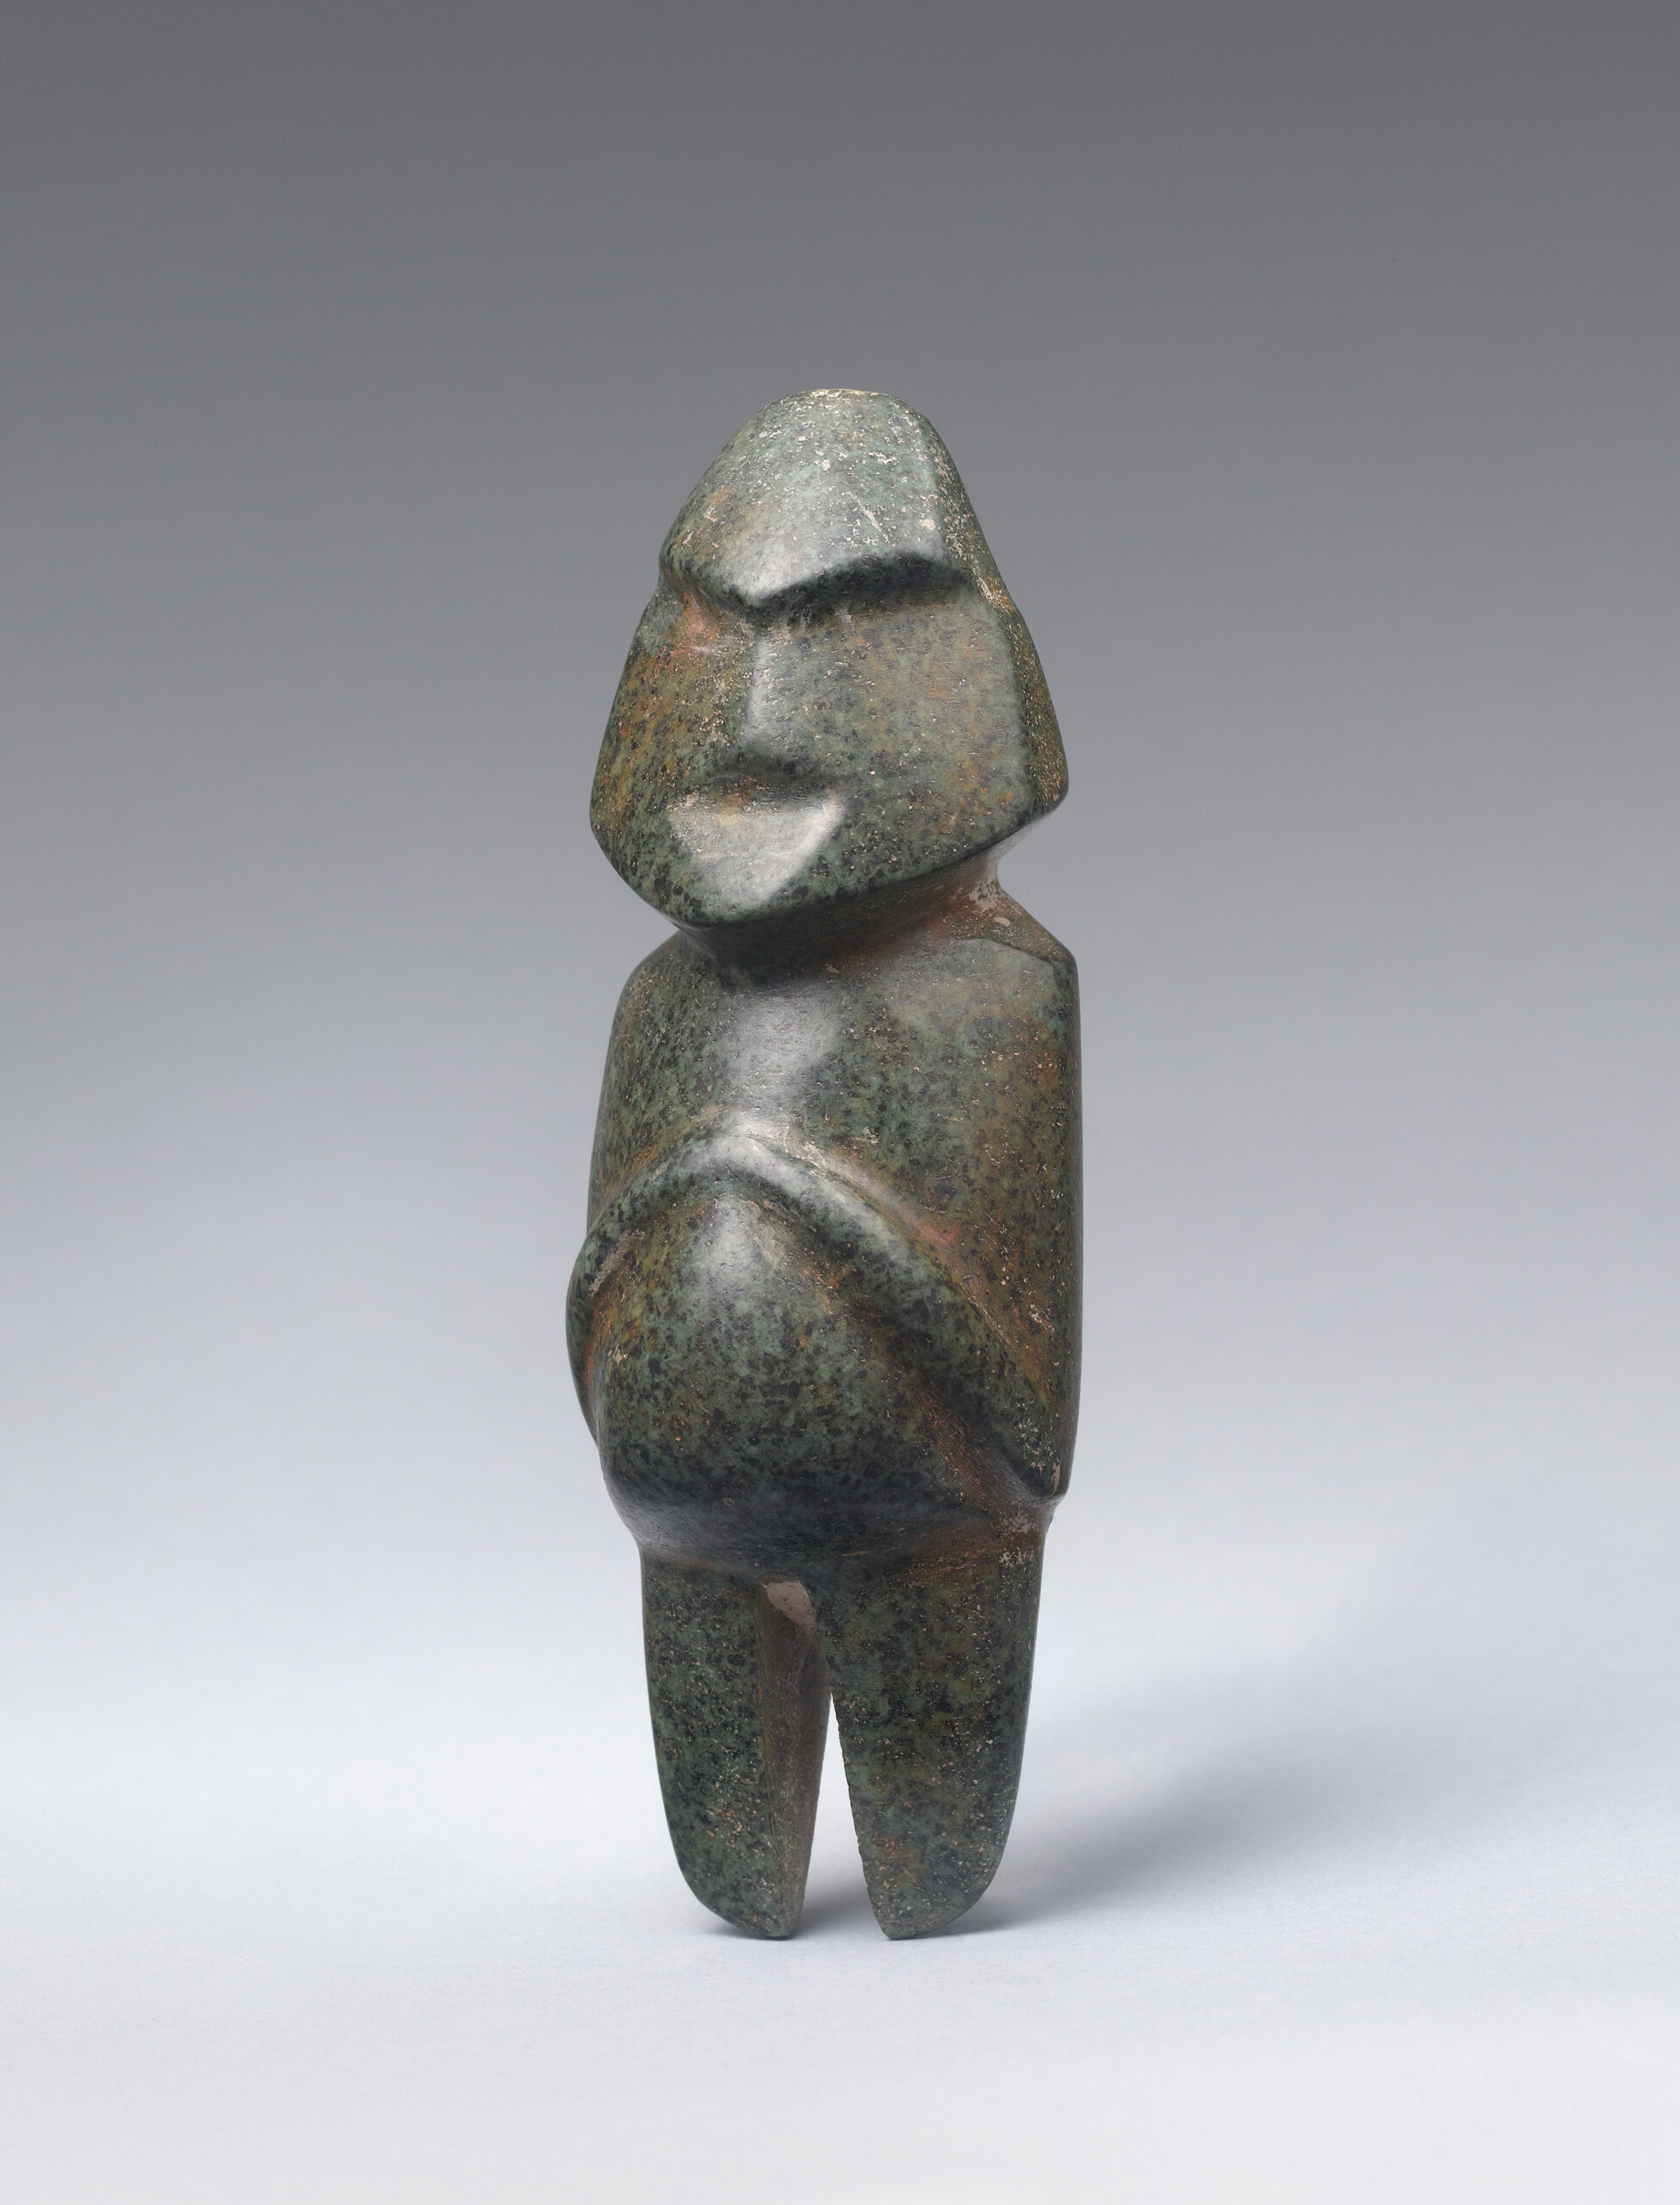 Small, abstract stone carving of a standing human figure with broad, pointed facial features and folded hands upon its round abdomen.